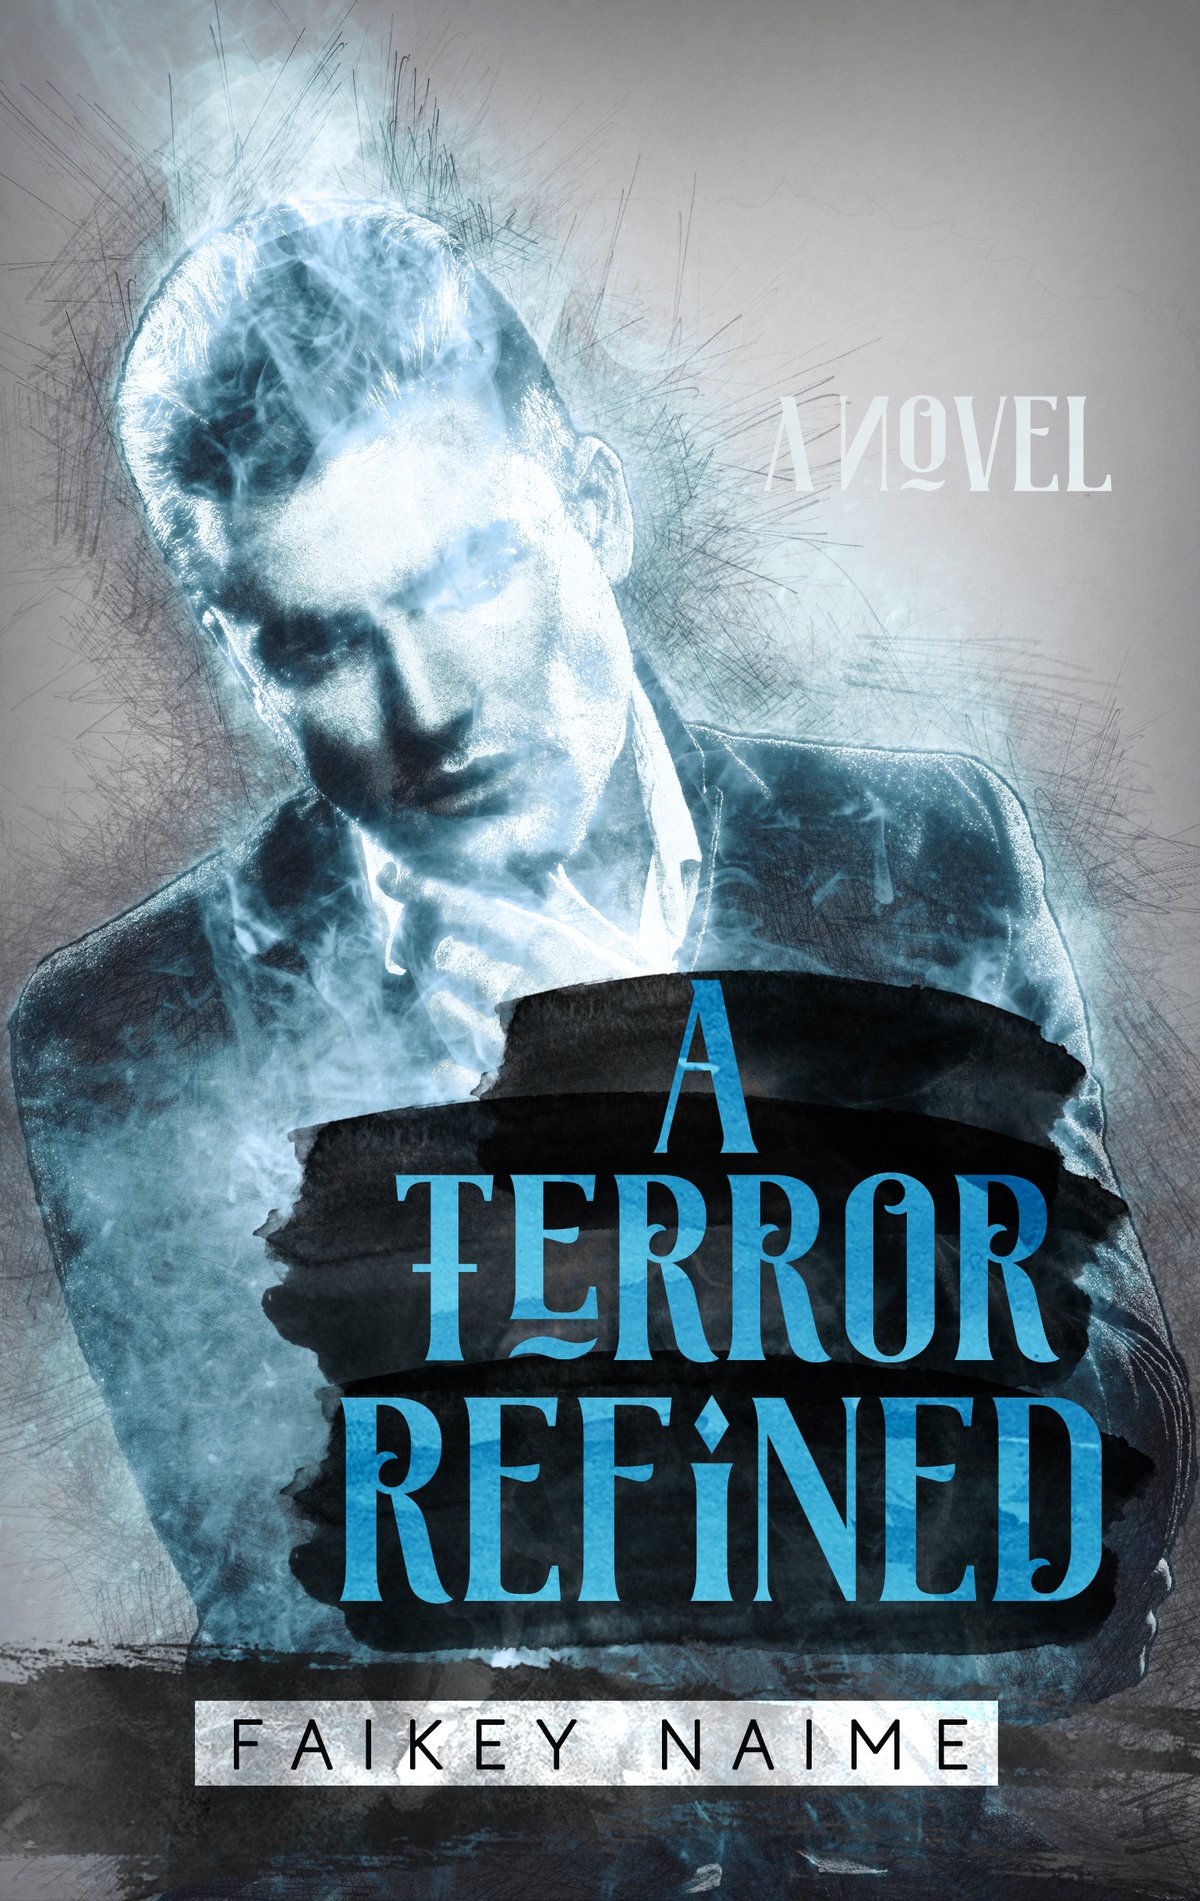 Image of "A Terror Refined"